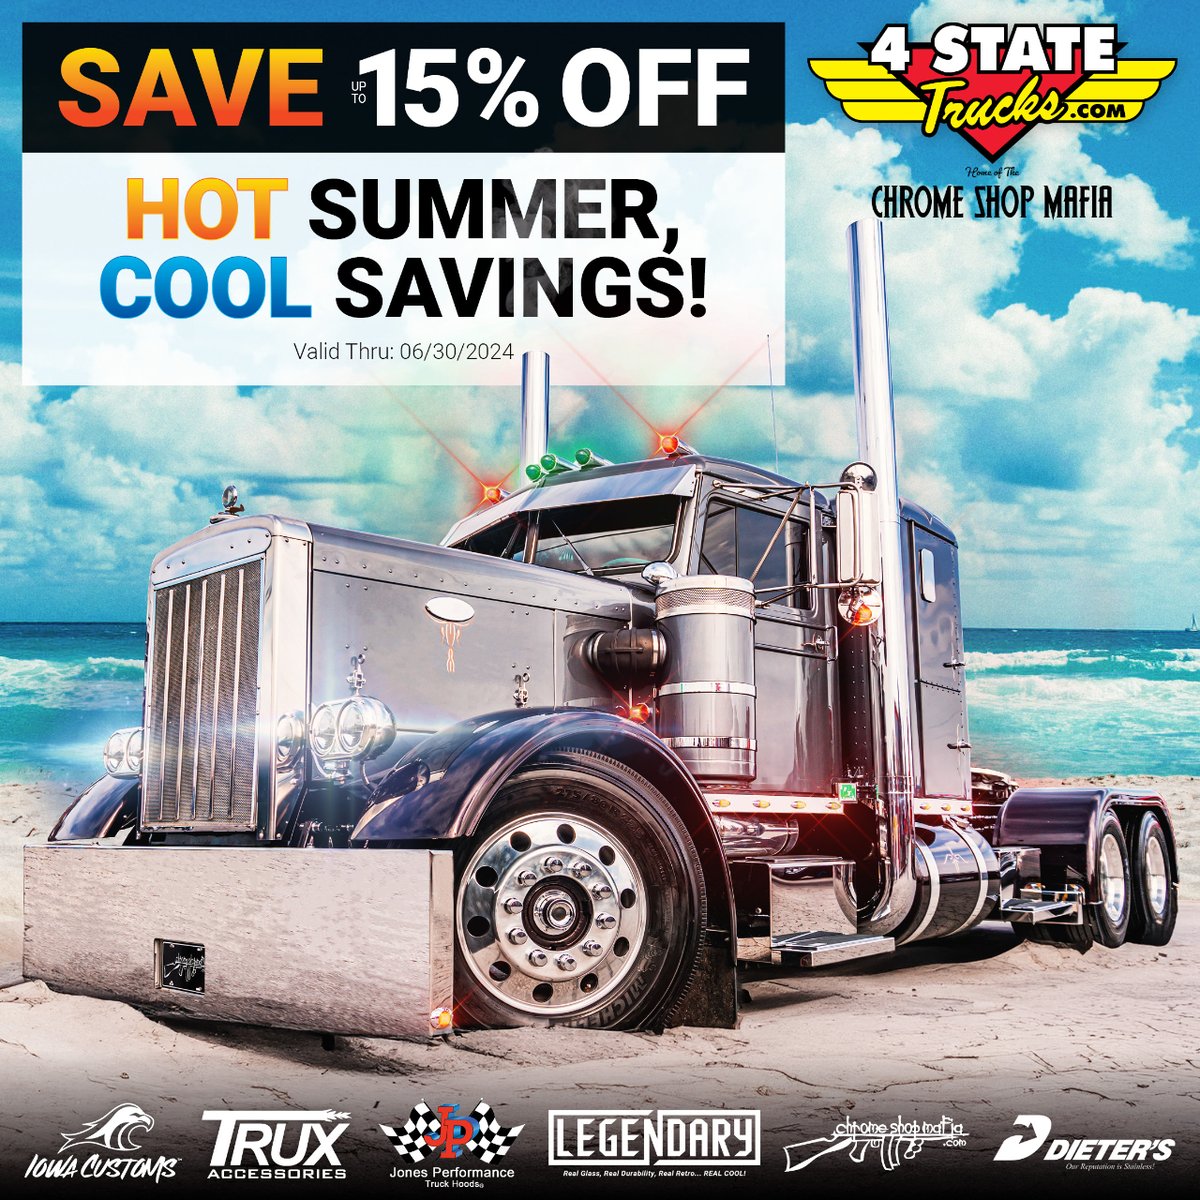 Have a hot Summer with cool savings of up to 15% OFF this June! 😎🏖️☀️ 4statetrucks.com/monthly-steals… Sales end 6/30/2024 at 11:59 p.m. cst  #4StateTrucks #ChromeShopMafia #chromeshop #semitrucks #trucking #bigrig #truckers #diesel #Steals&Deals